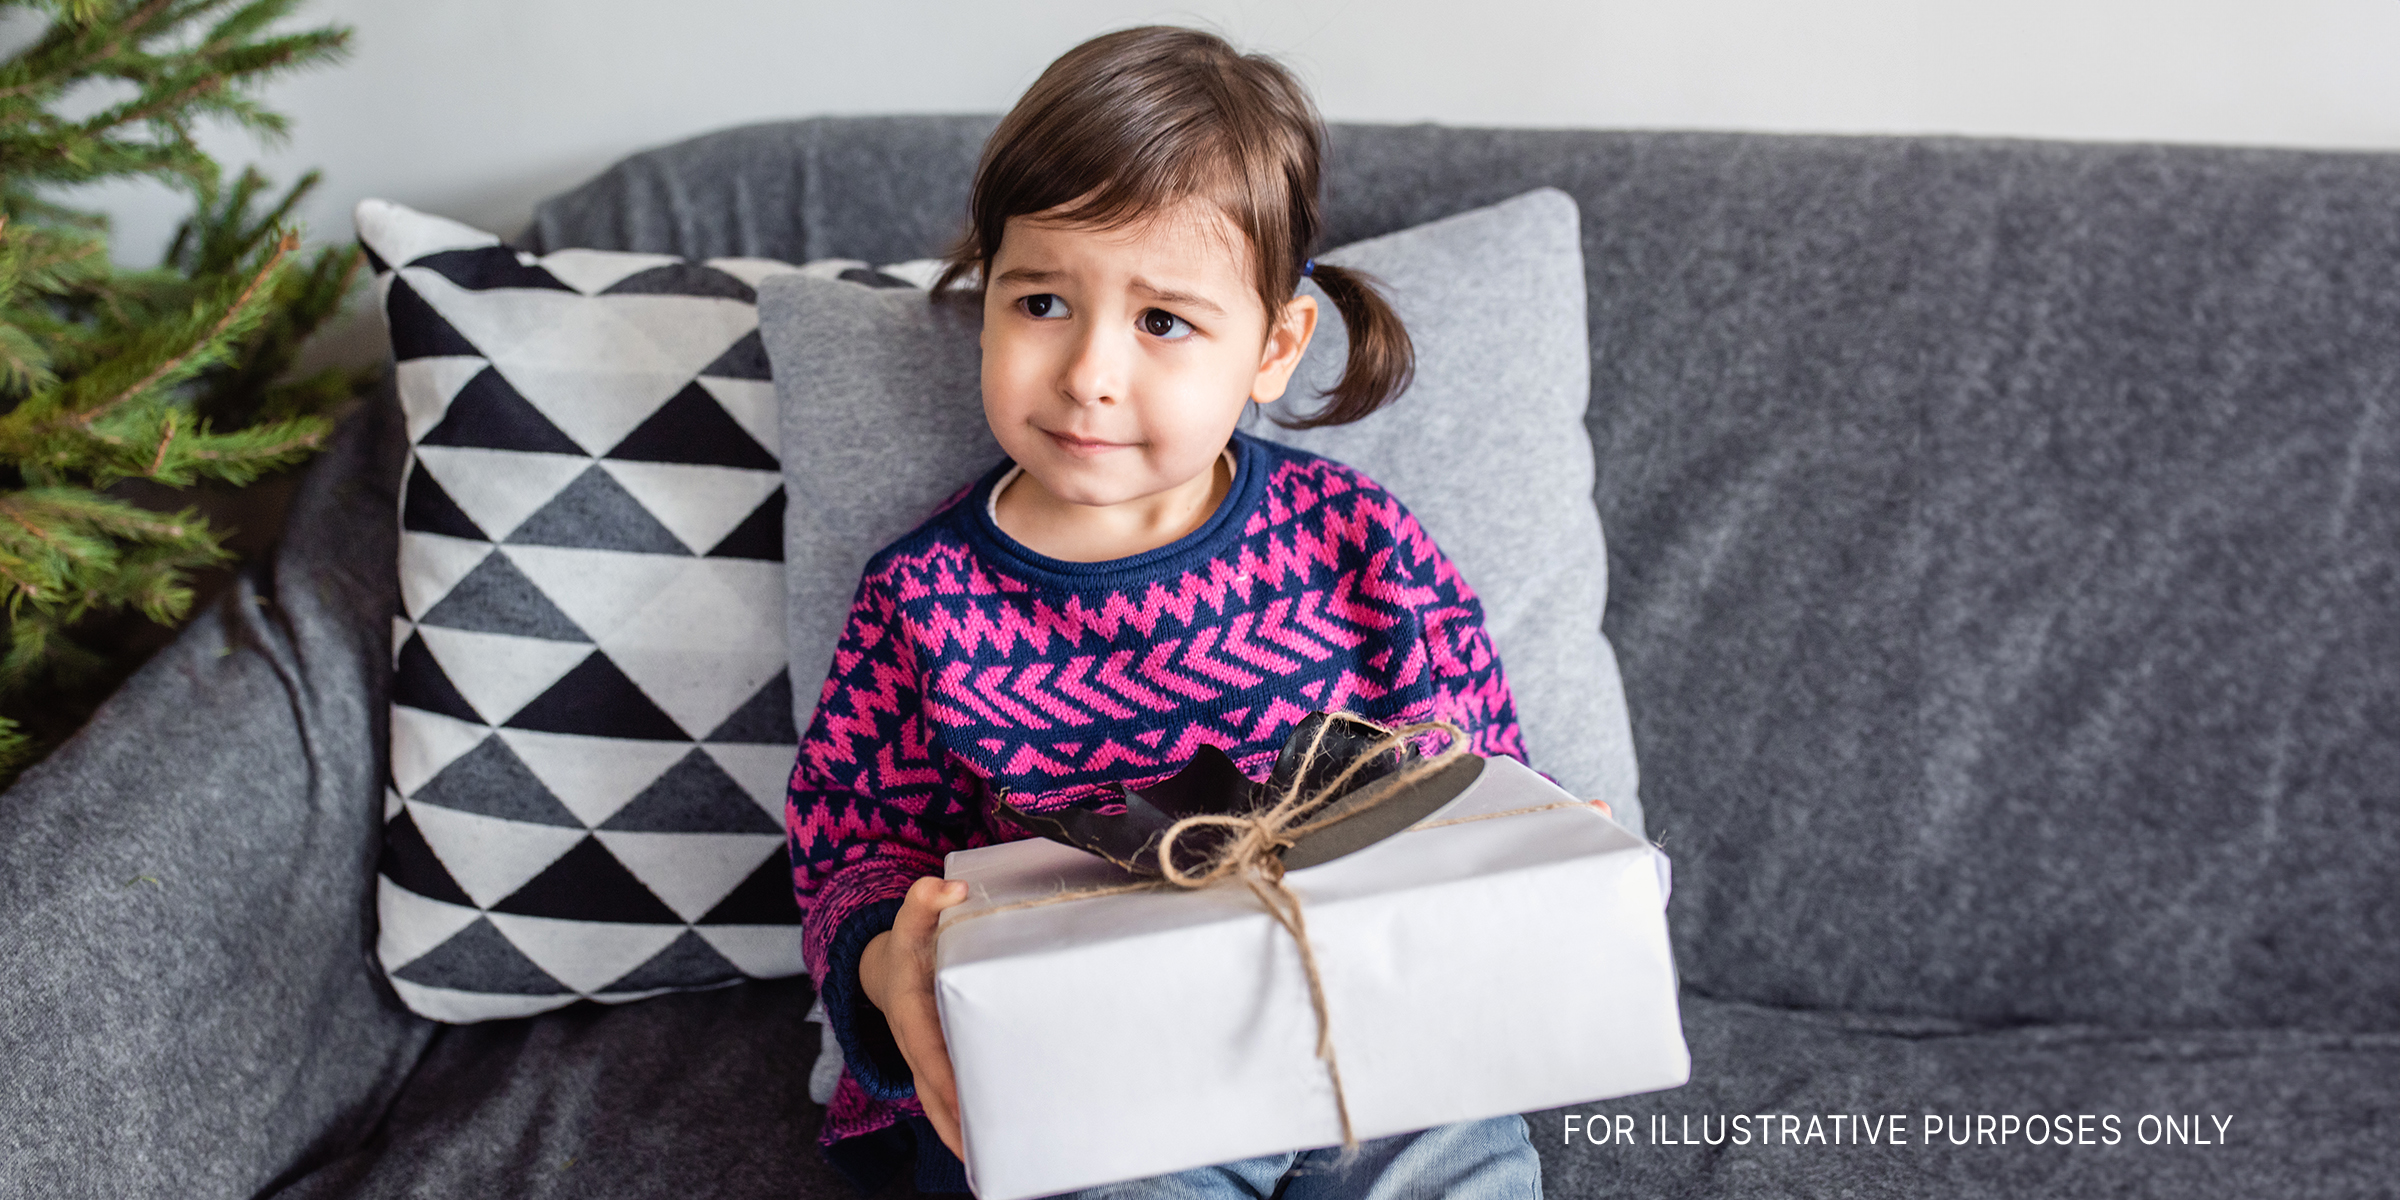 A young girl with a present | Source: Shutterstock